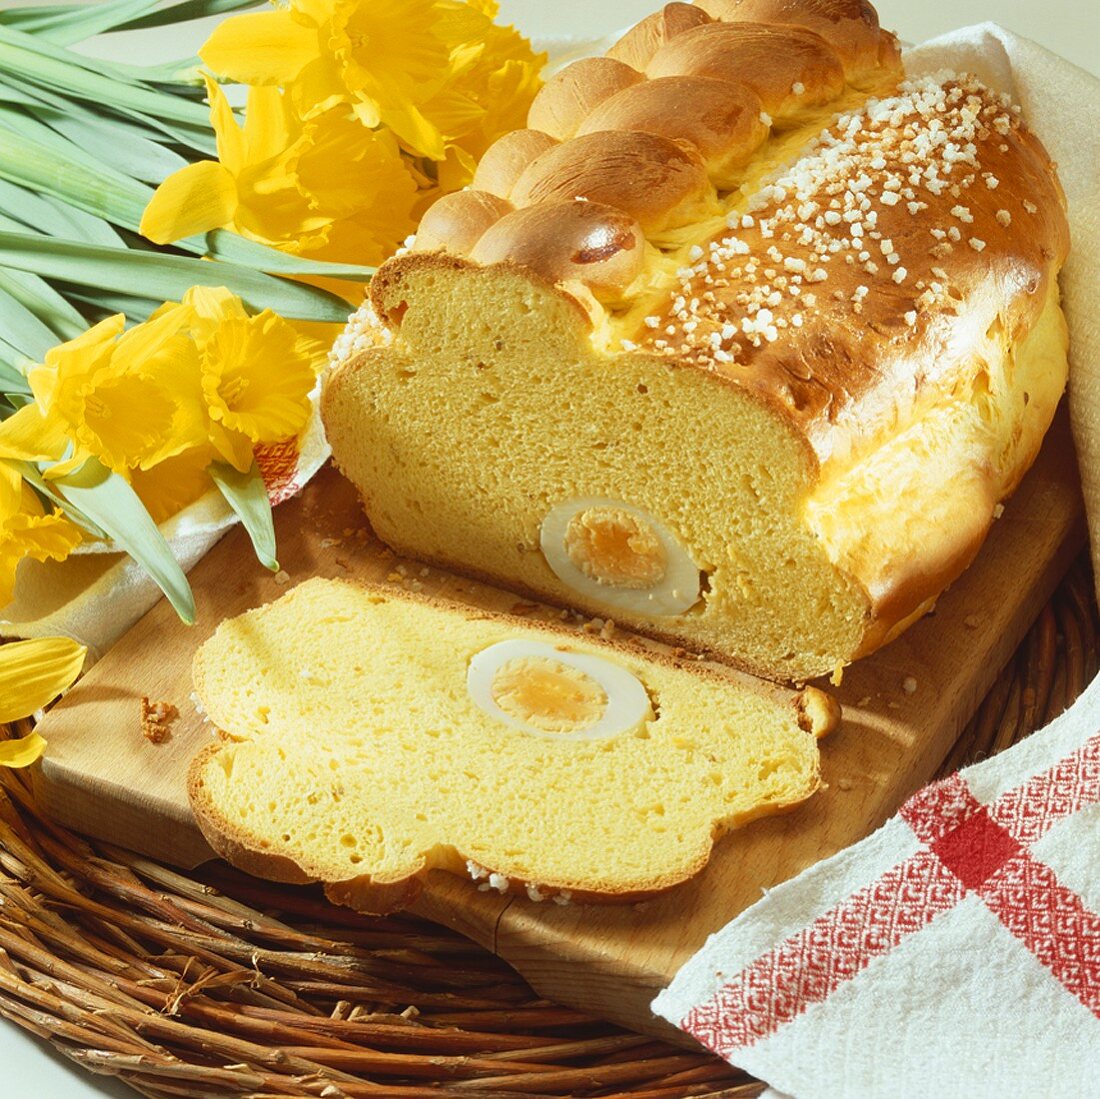 Yeasted Easter bread